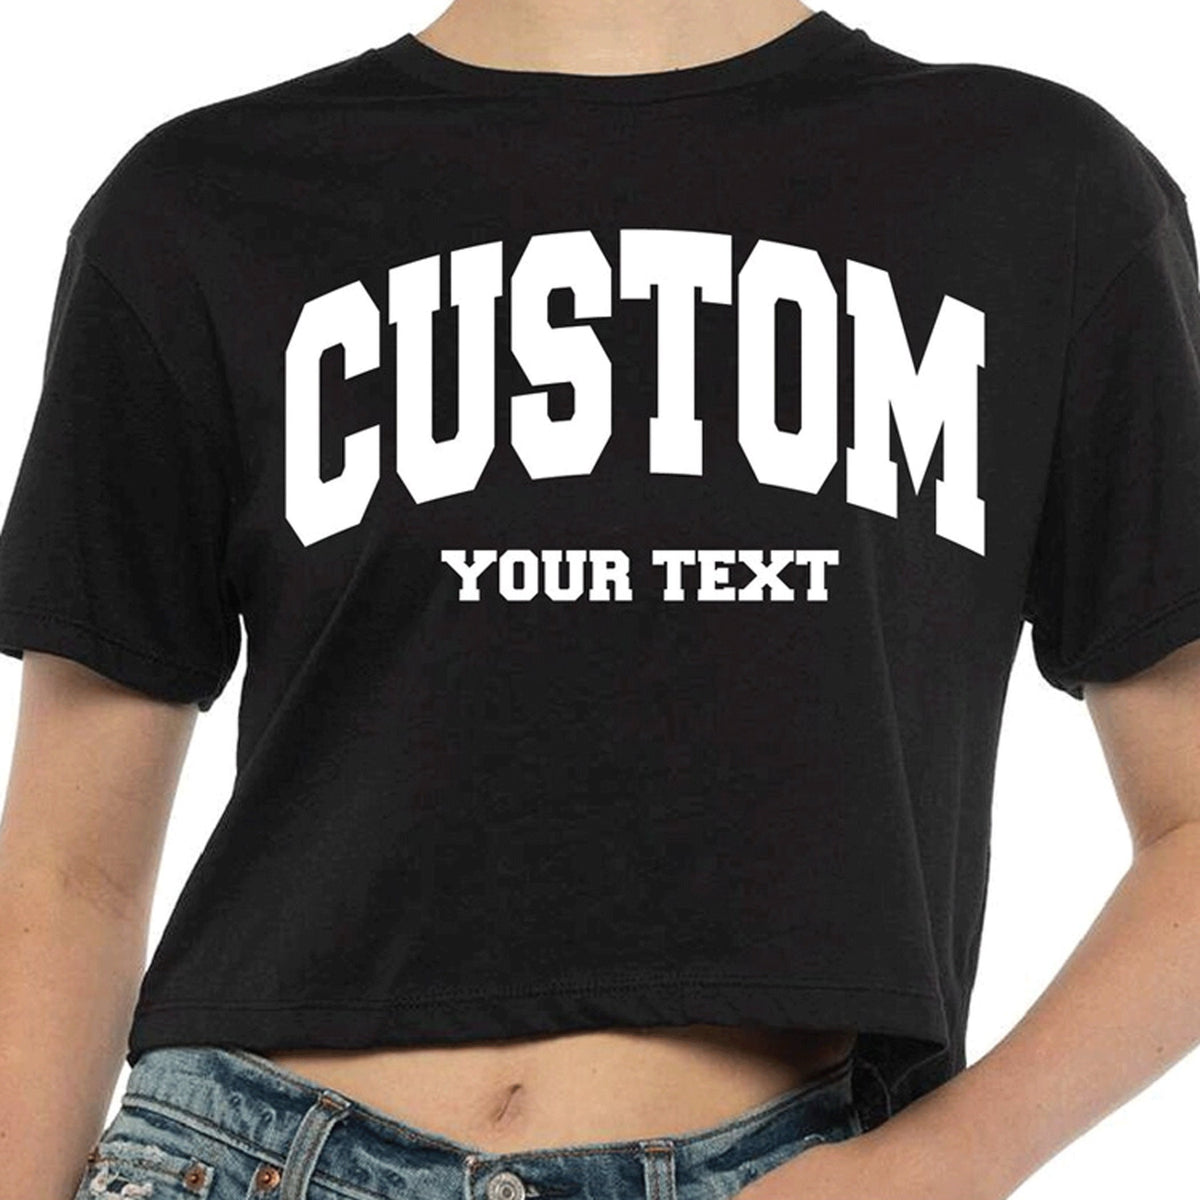 Custom Women's Fitted Tee, Custom Text Baby Tee, Custom Text Shirt, Personalized Shirt, Gift for her, Baby Tee, Retro 90s Style Tee